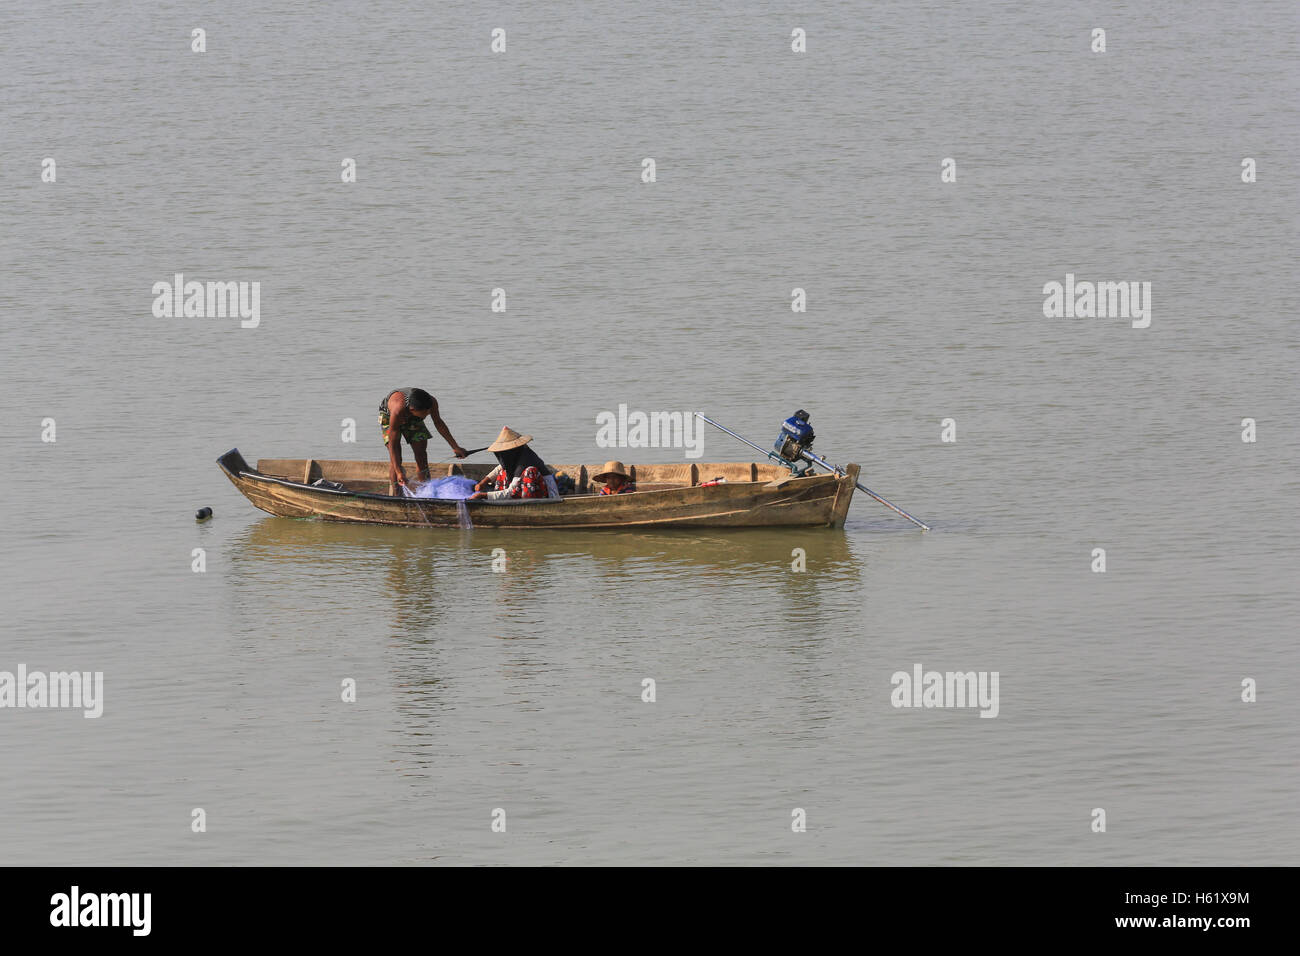 The family fishing on the boat Stock Photo - Alamy